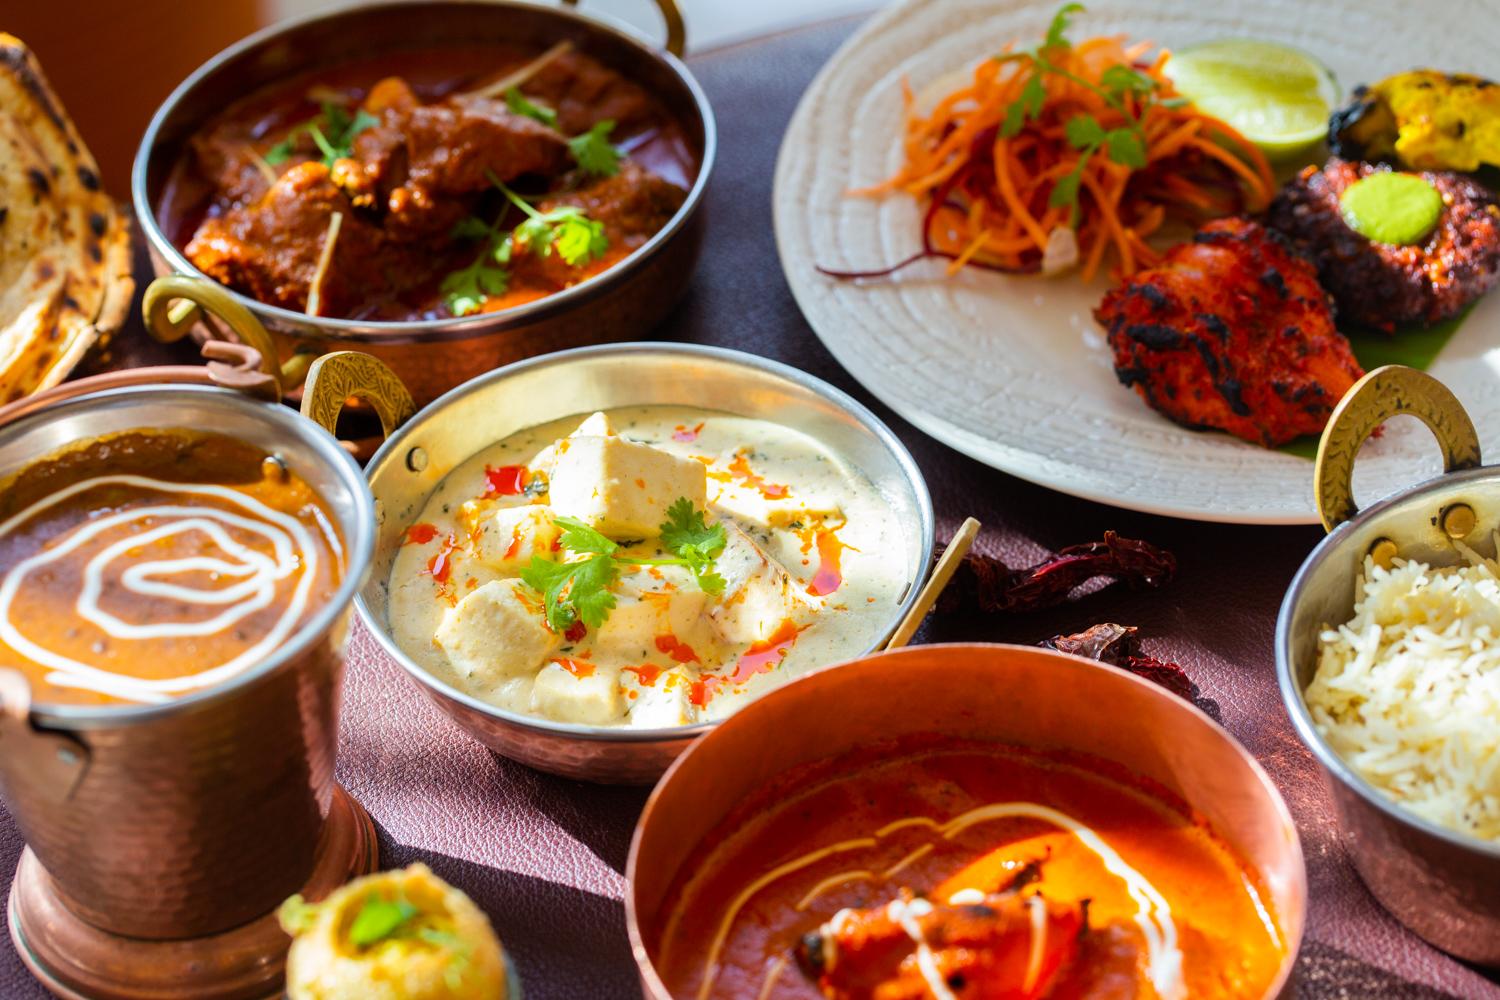 REVIEW: THE SUMMER FLAVORS AT KHYBER, THE AWARD-WINNING INDIAN RESTAURANT IN DUBAI